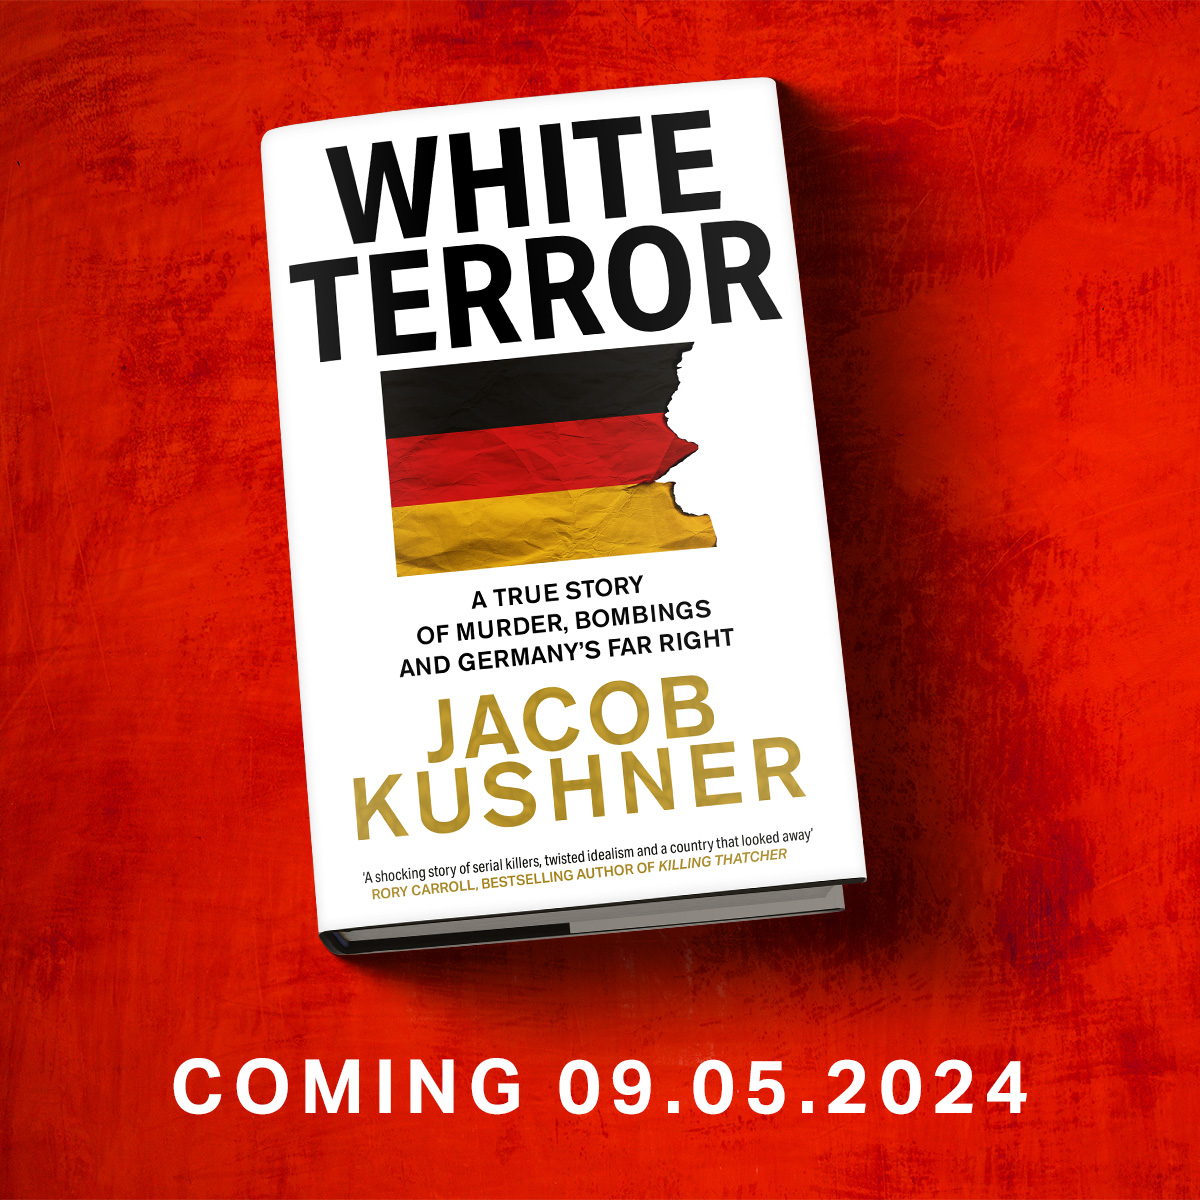 Years in the making, my book about Germany's far-right, anti-immigrant terrorists is now available for pre-order: harpercollins.co.uk/products/white… @cheng_christine @Nanjala1 @sasha_p_s @HConstable @dlknowles @HarperCollinsUK @swilliamsjourno @CassVinograd @ffregister